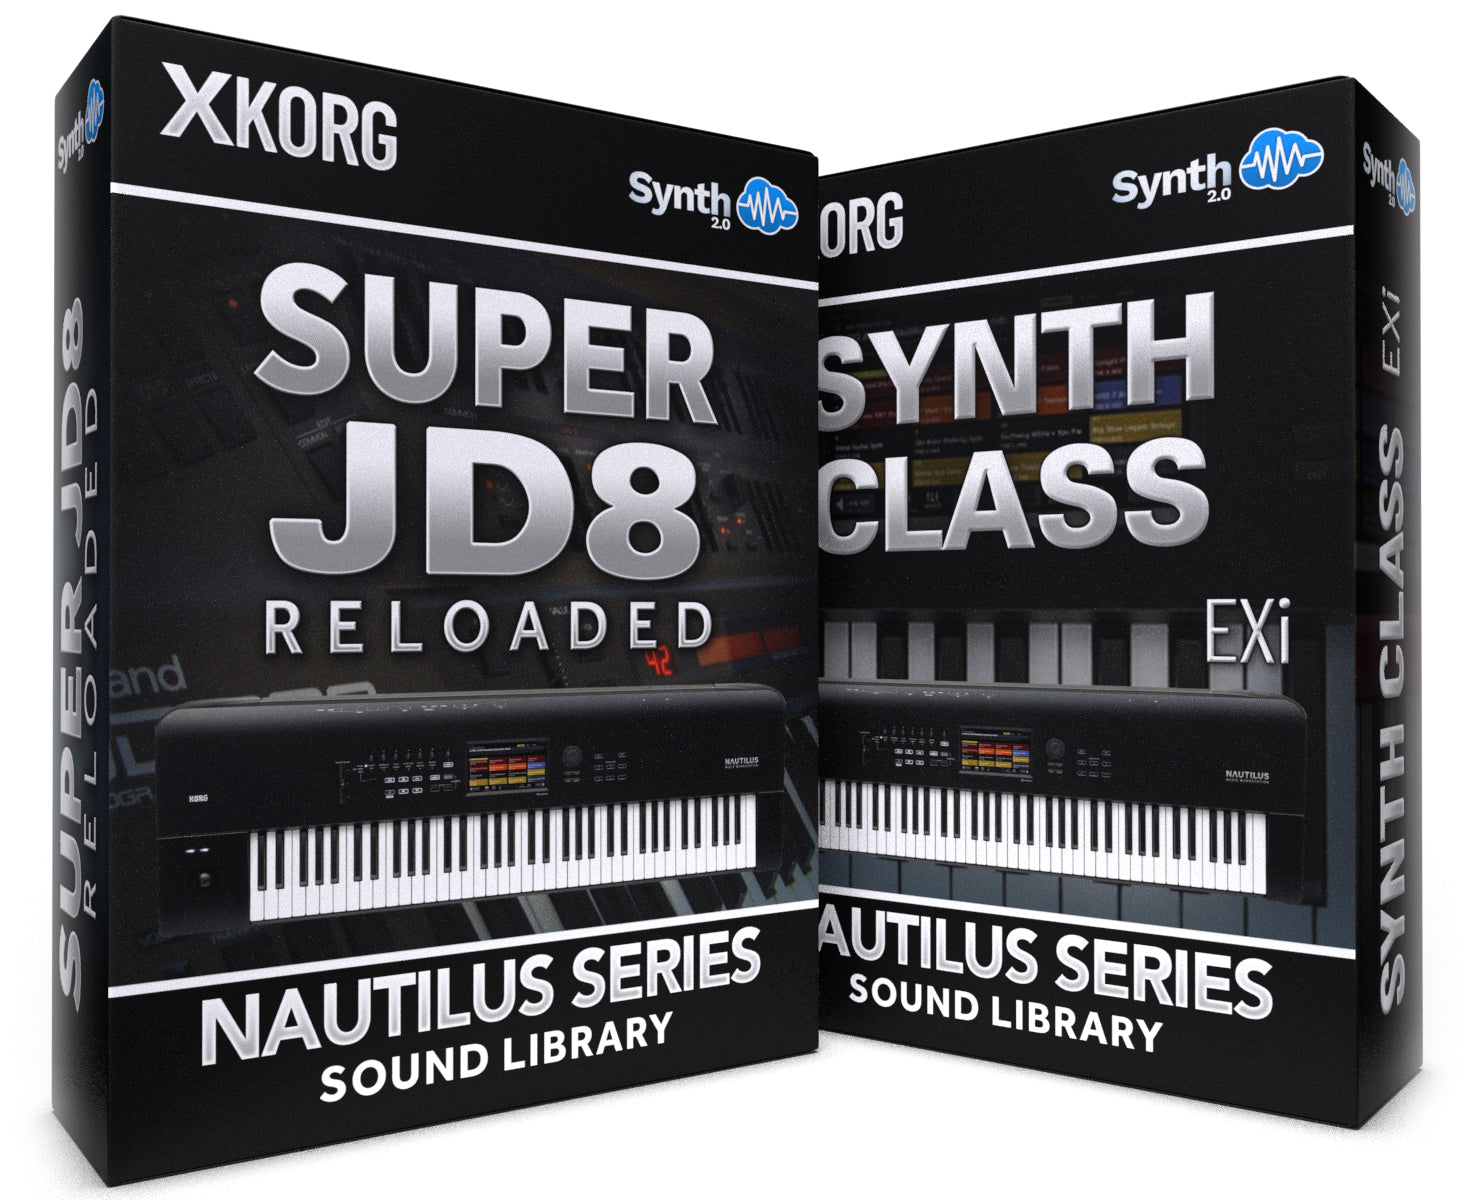 SSX138 - ( Bundle ) - Synth Class EXi + Super JD8 Reloaded - Korg Nautilus Series